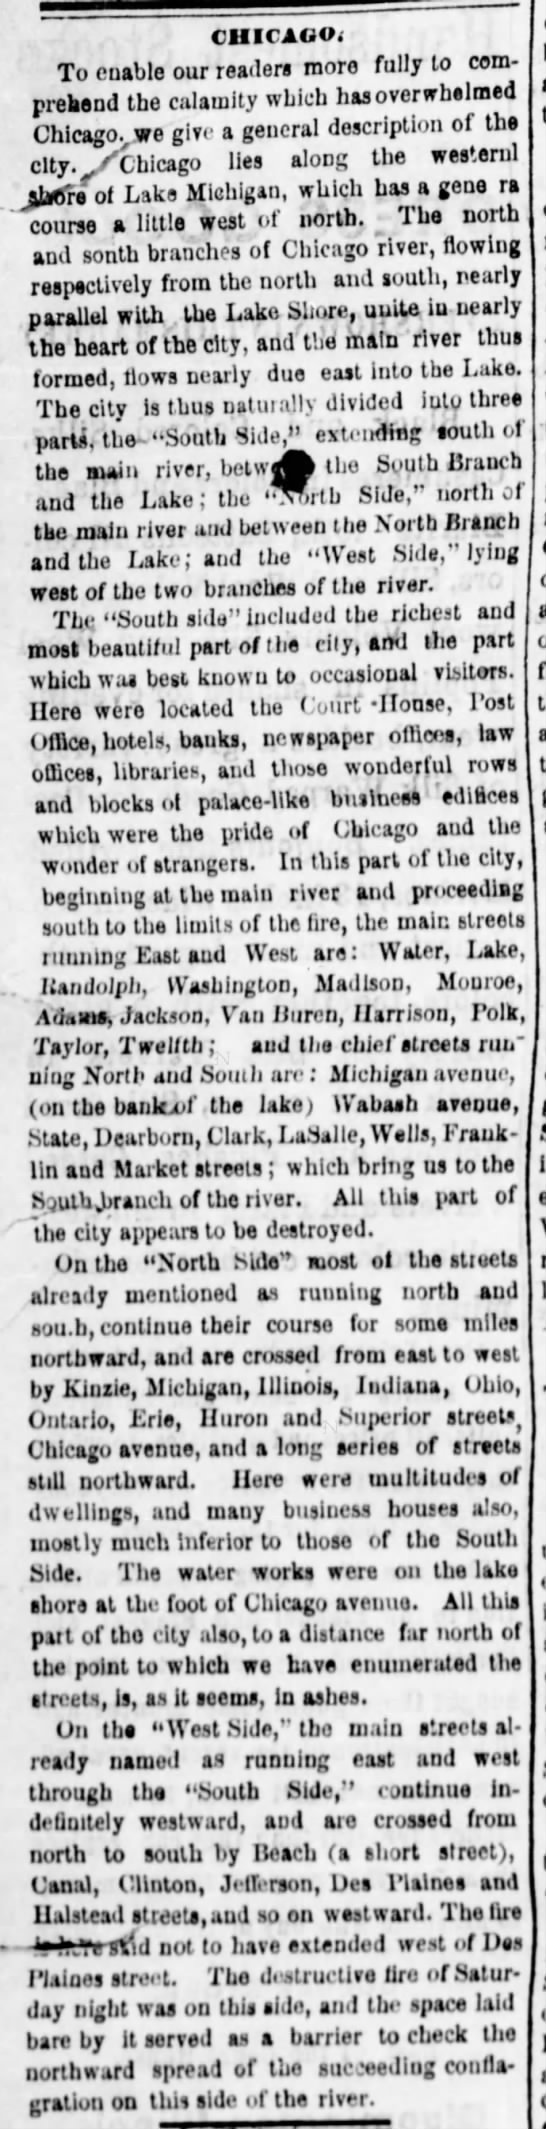 Newspaper description of the city of Chicago as it stood before the Great Fire of 1871 - 